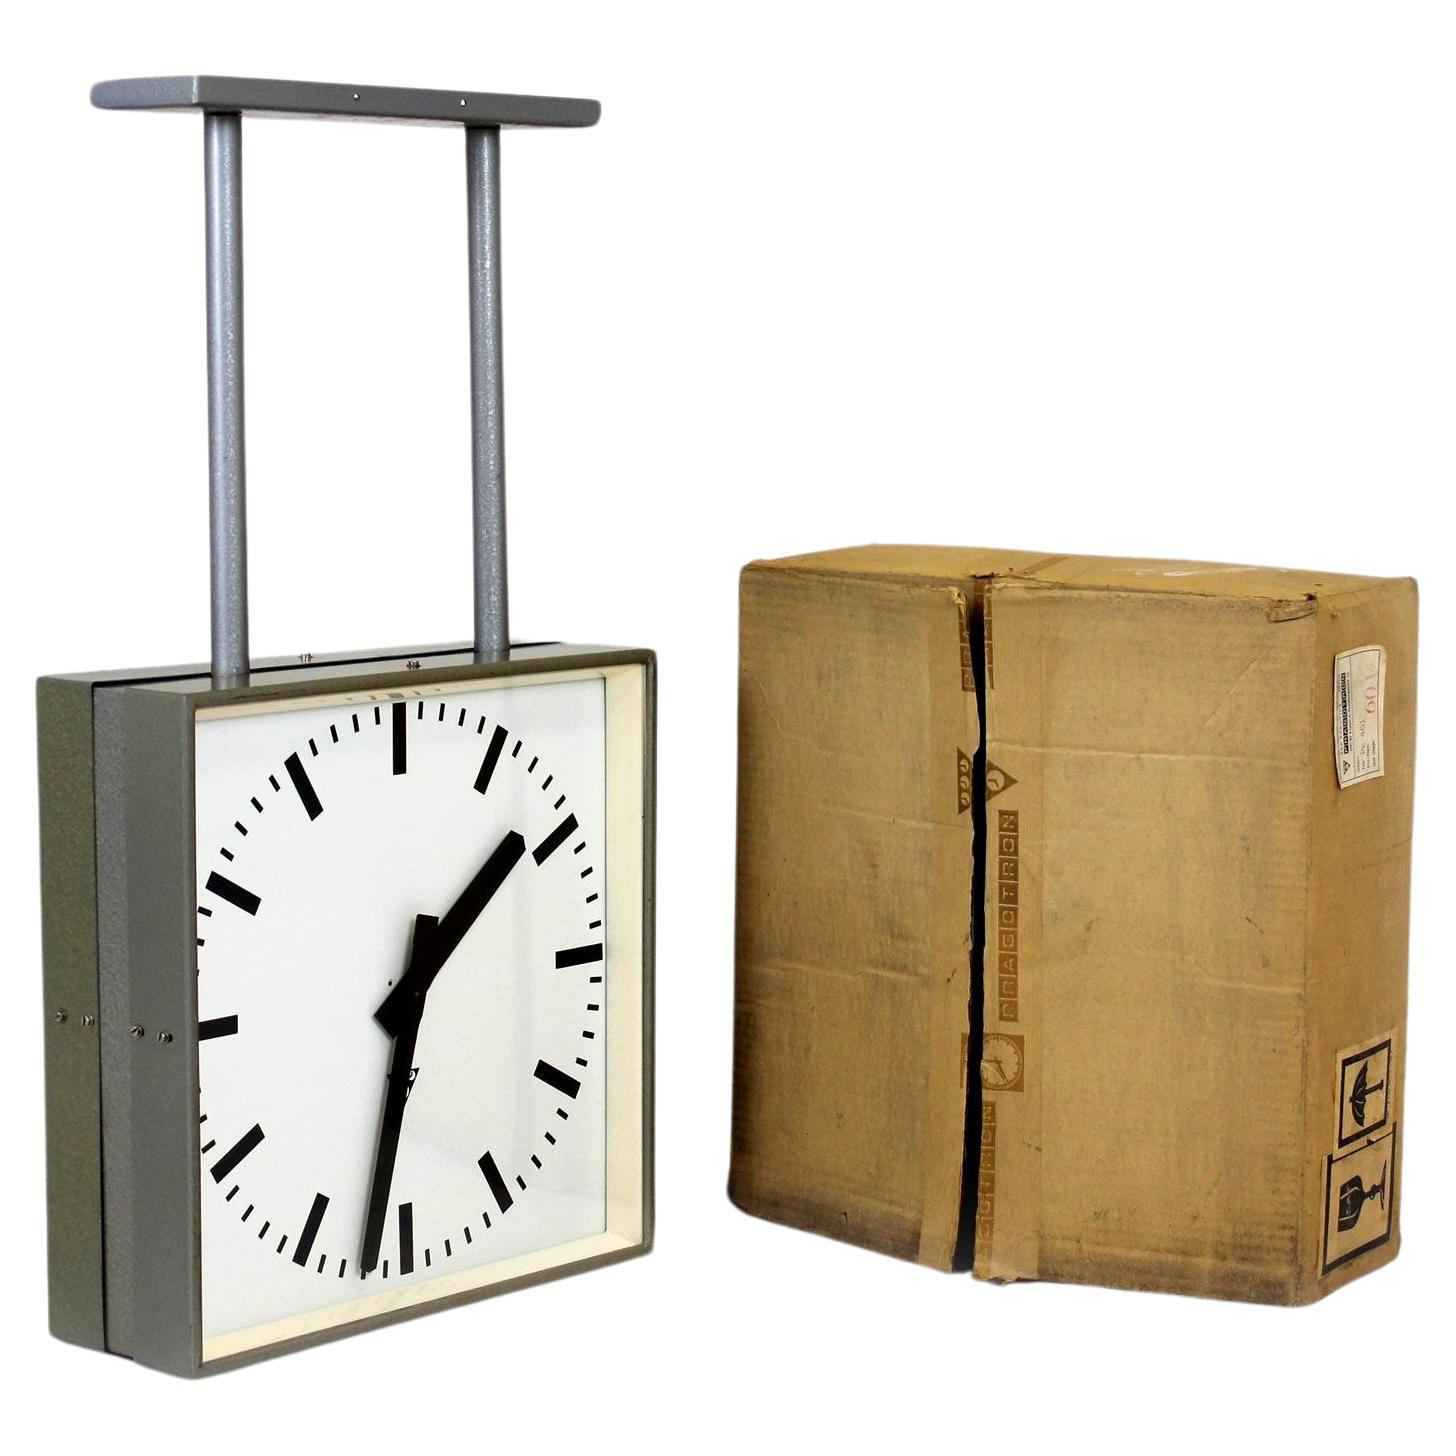 Large Double-Sided Railway Clock from Pragotron, 1980s (New, in box) For Sale